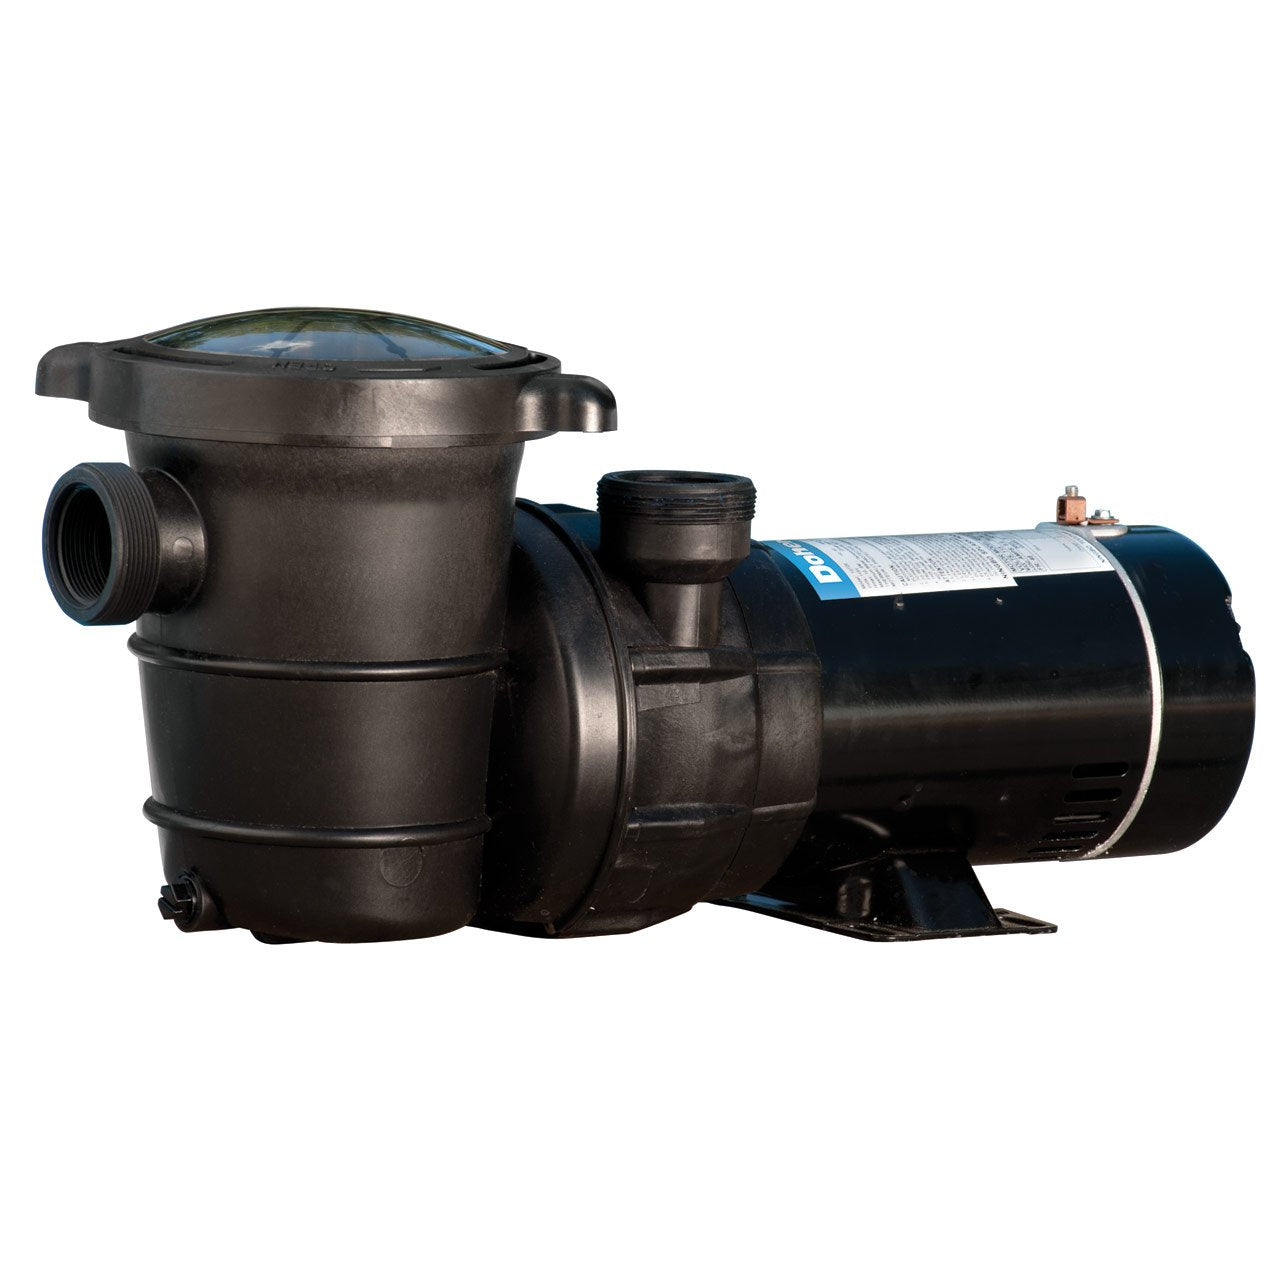 Doheny's Above Ground Pool Pro Swimming Pool Pumps | Above Ground 1.5 HP Pool Pump, 115V, 83 GPM | Updated Motors Have Lower Energy Consumption While Maintaining Equal Performance | 1.2 THP | 1.5 Inch Internal Threading And 2.5 Inch External Threading ...